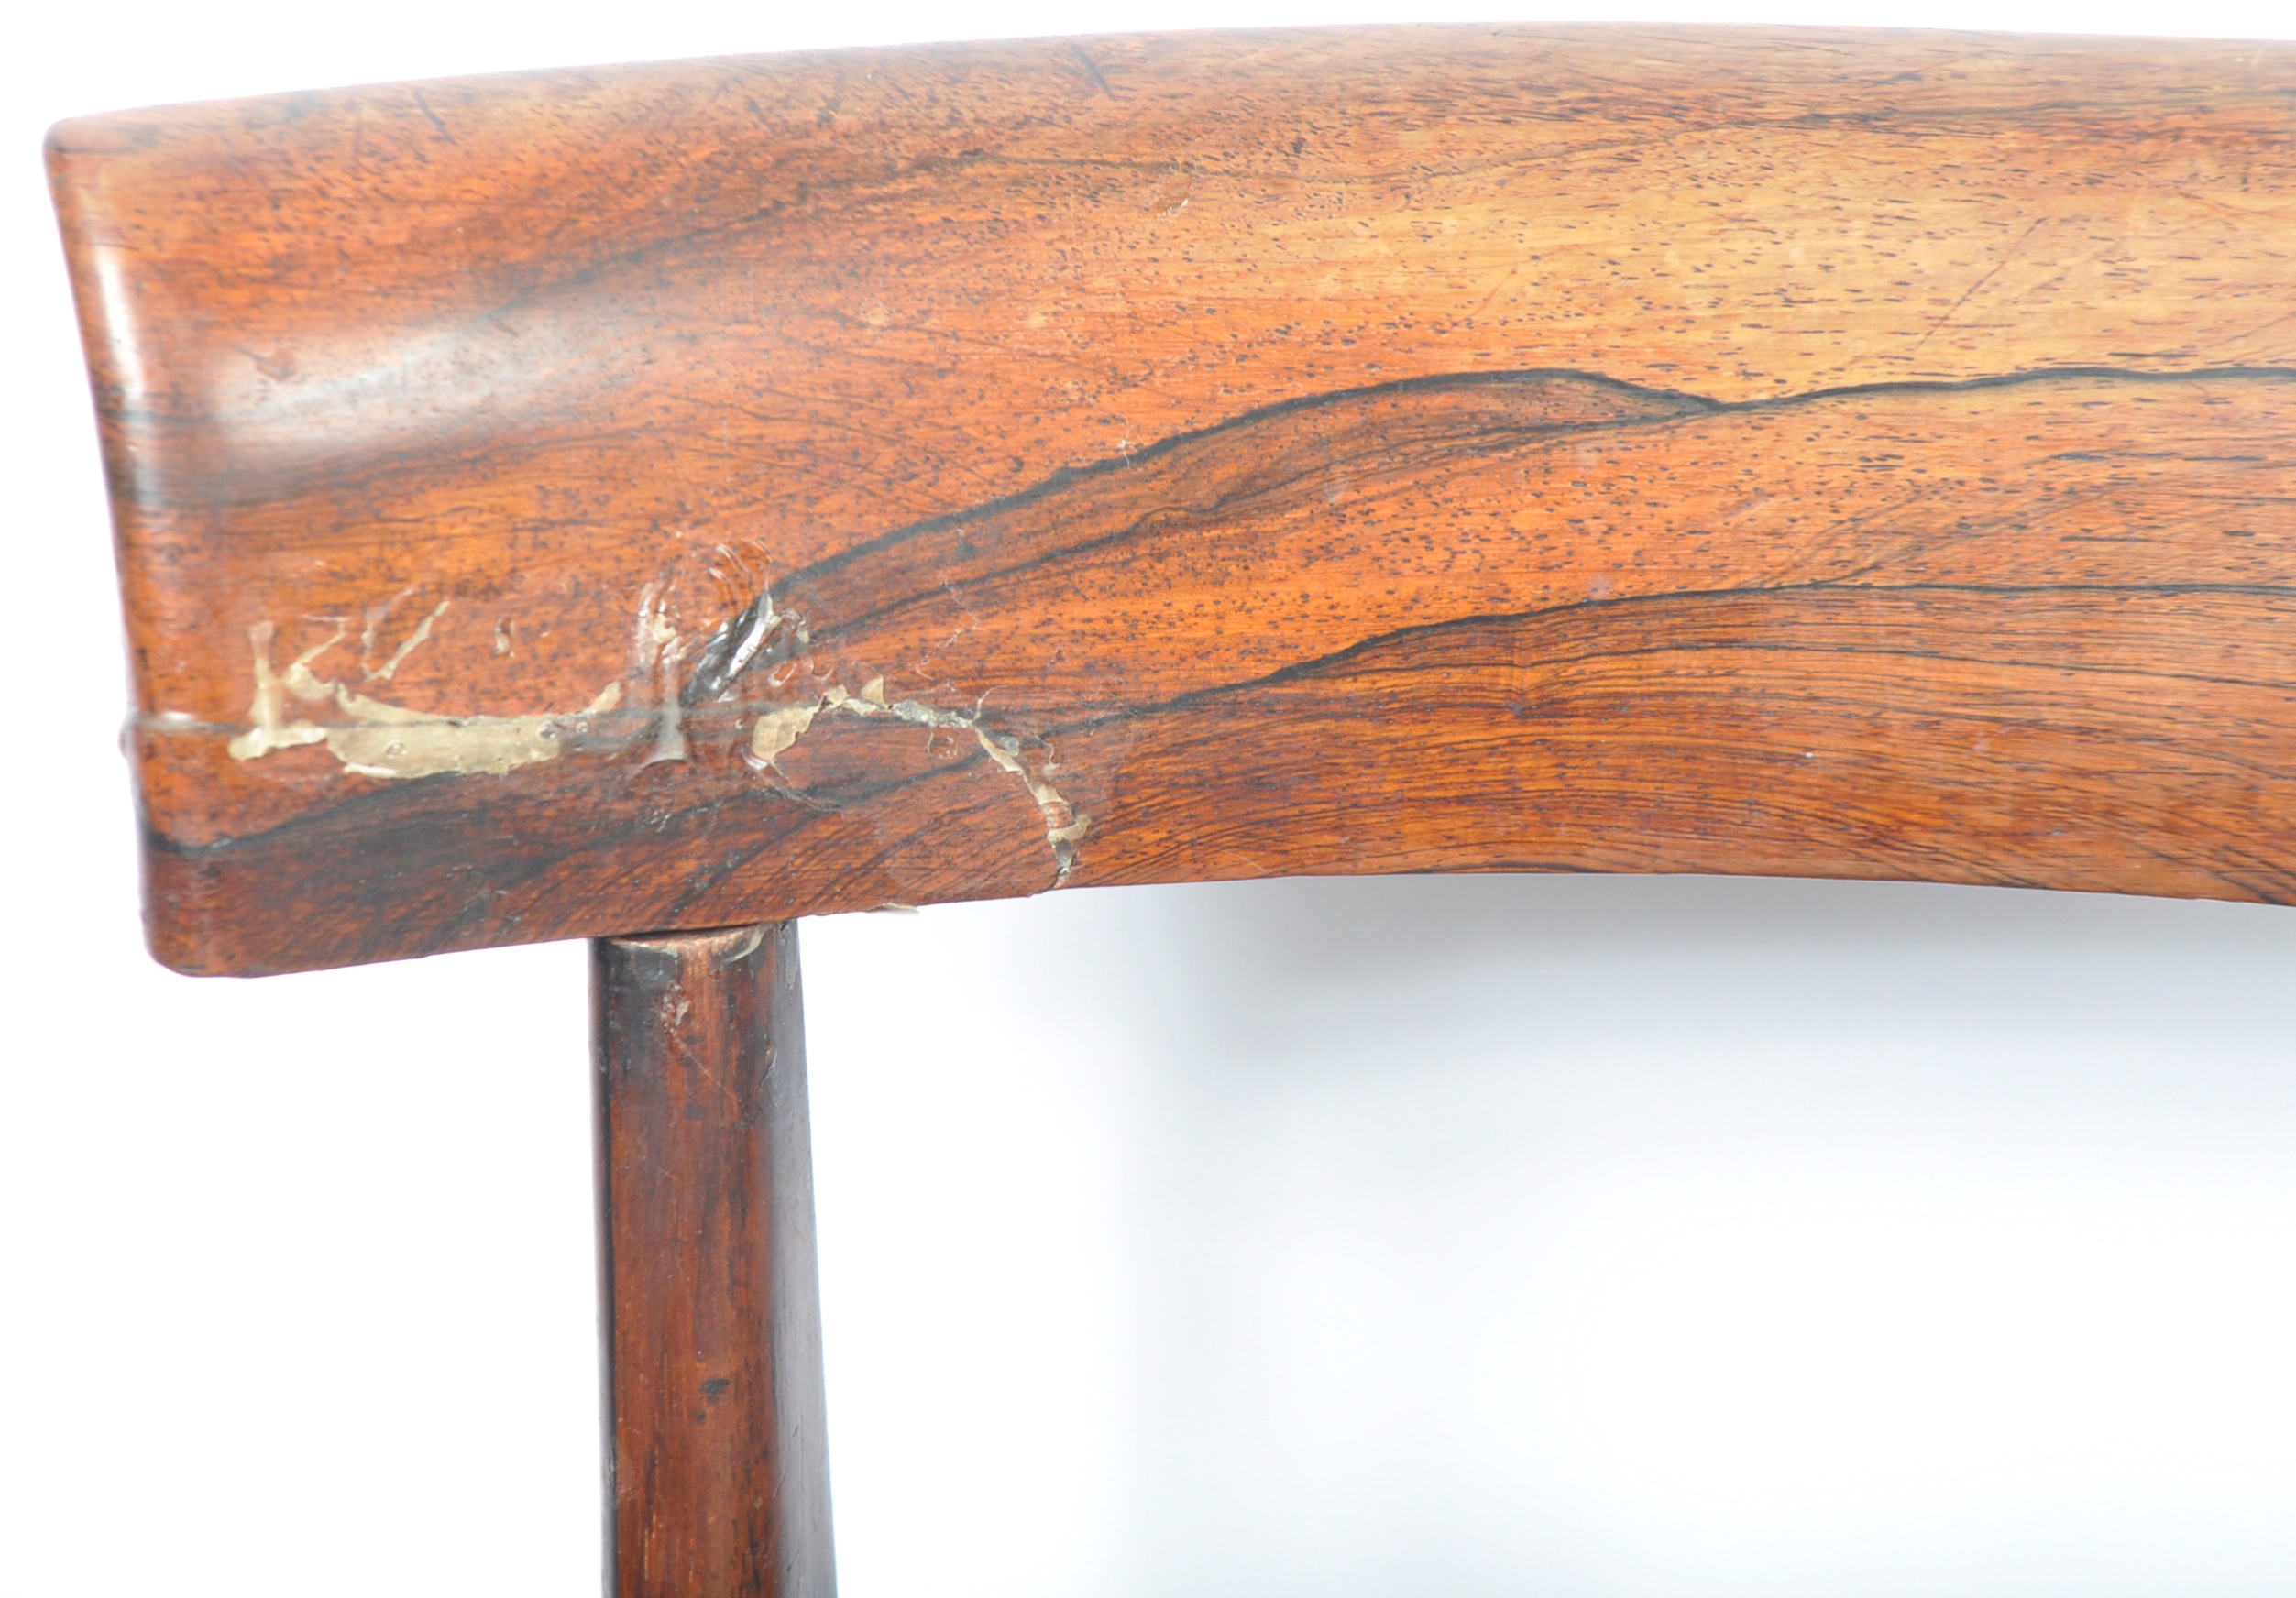 SET OF SIX ANTIQUE ROSEWOOD DINING CHAIRS IN THE GILLOWS STYLE - Image 7 of 12